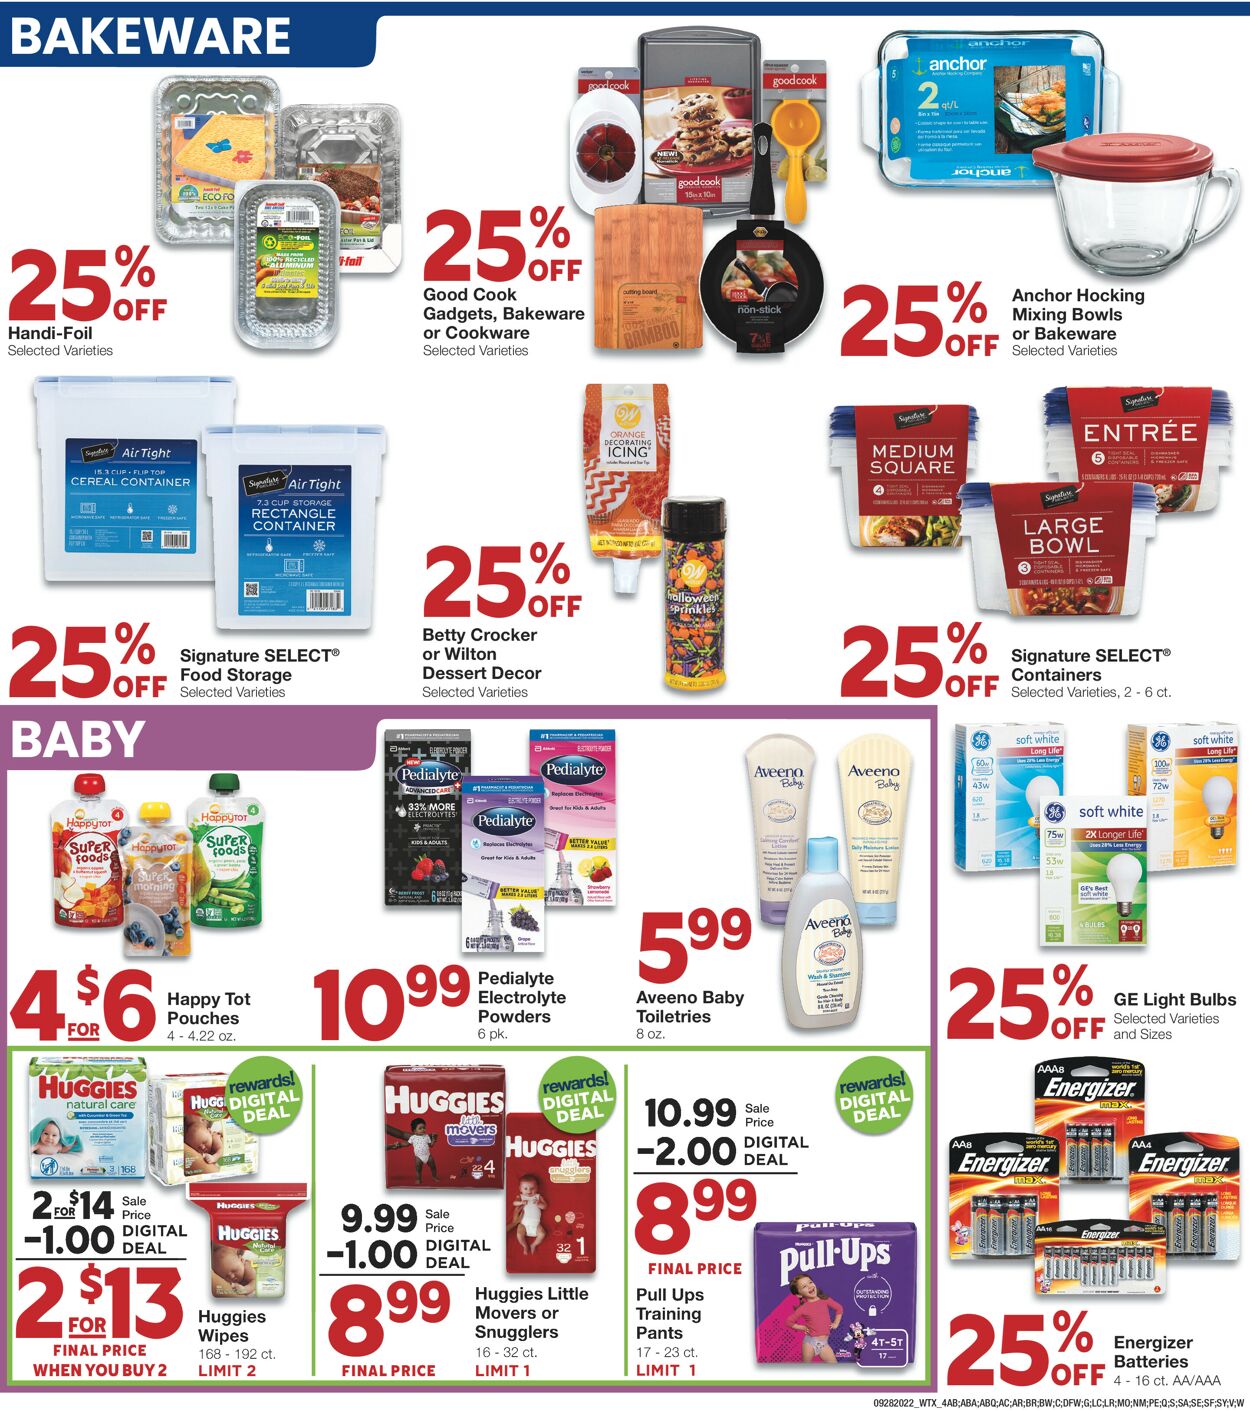 United Supermarkets Ad from 09/28/2022